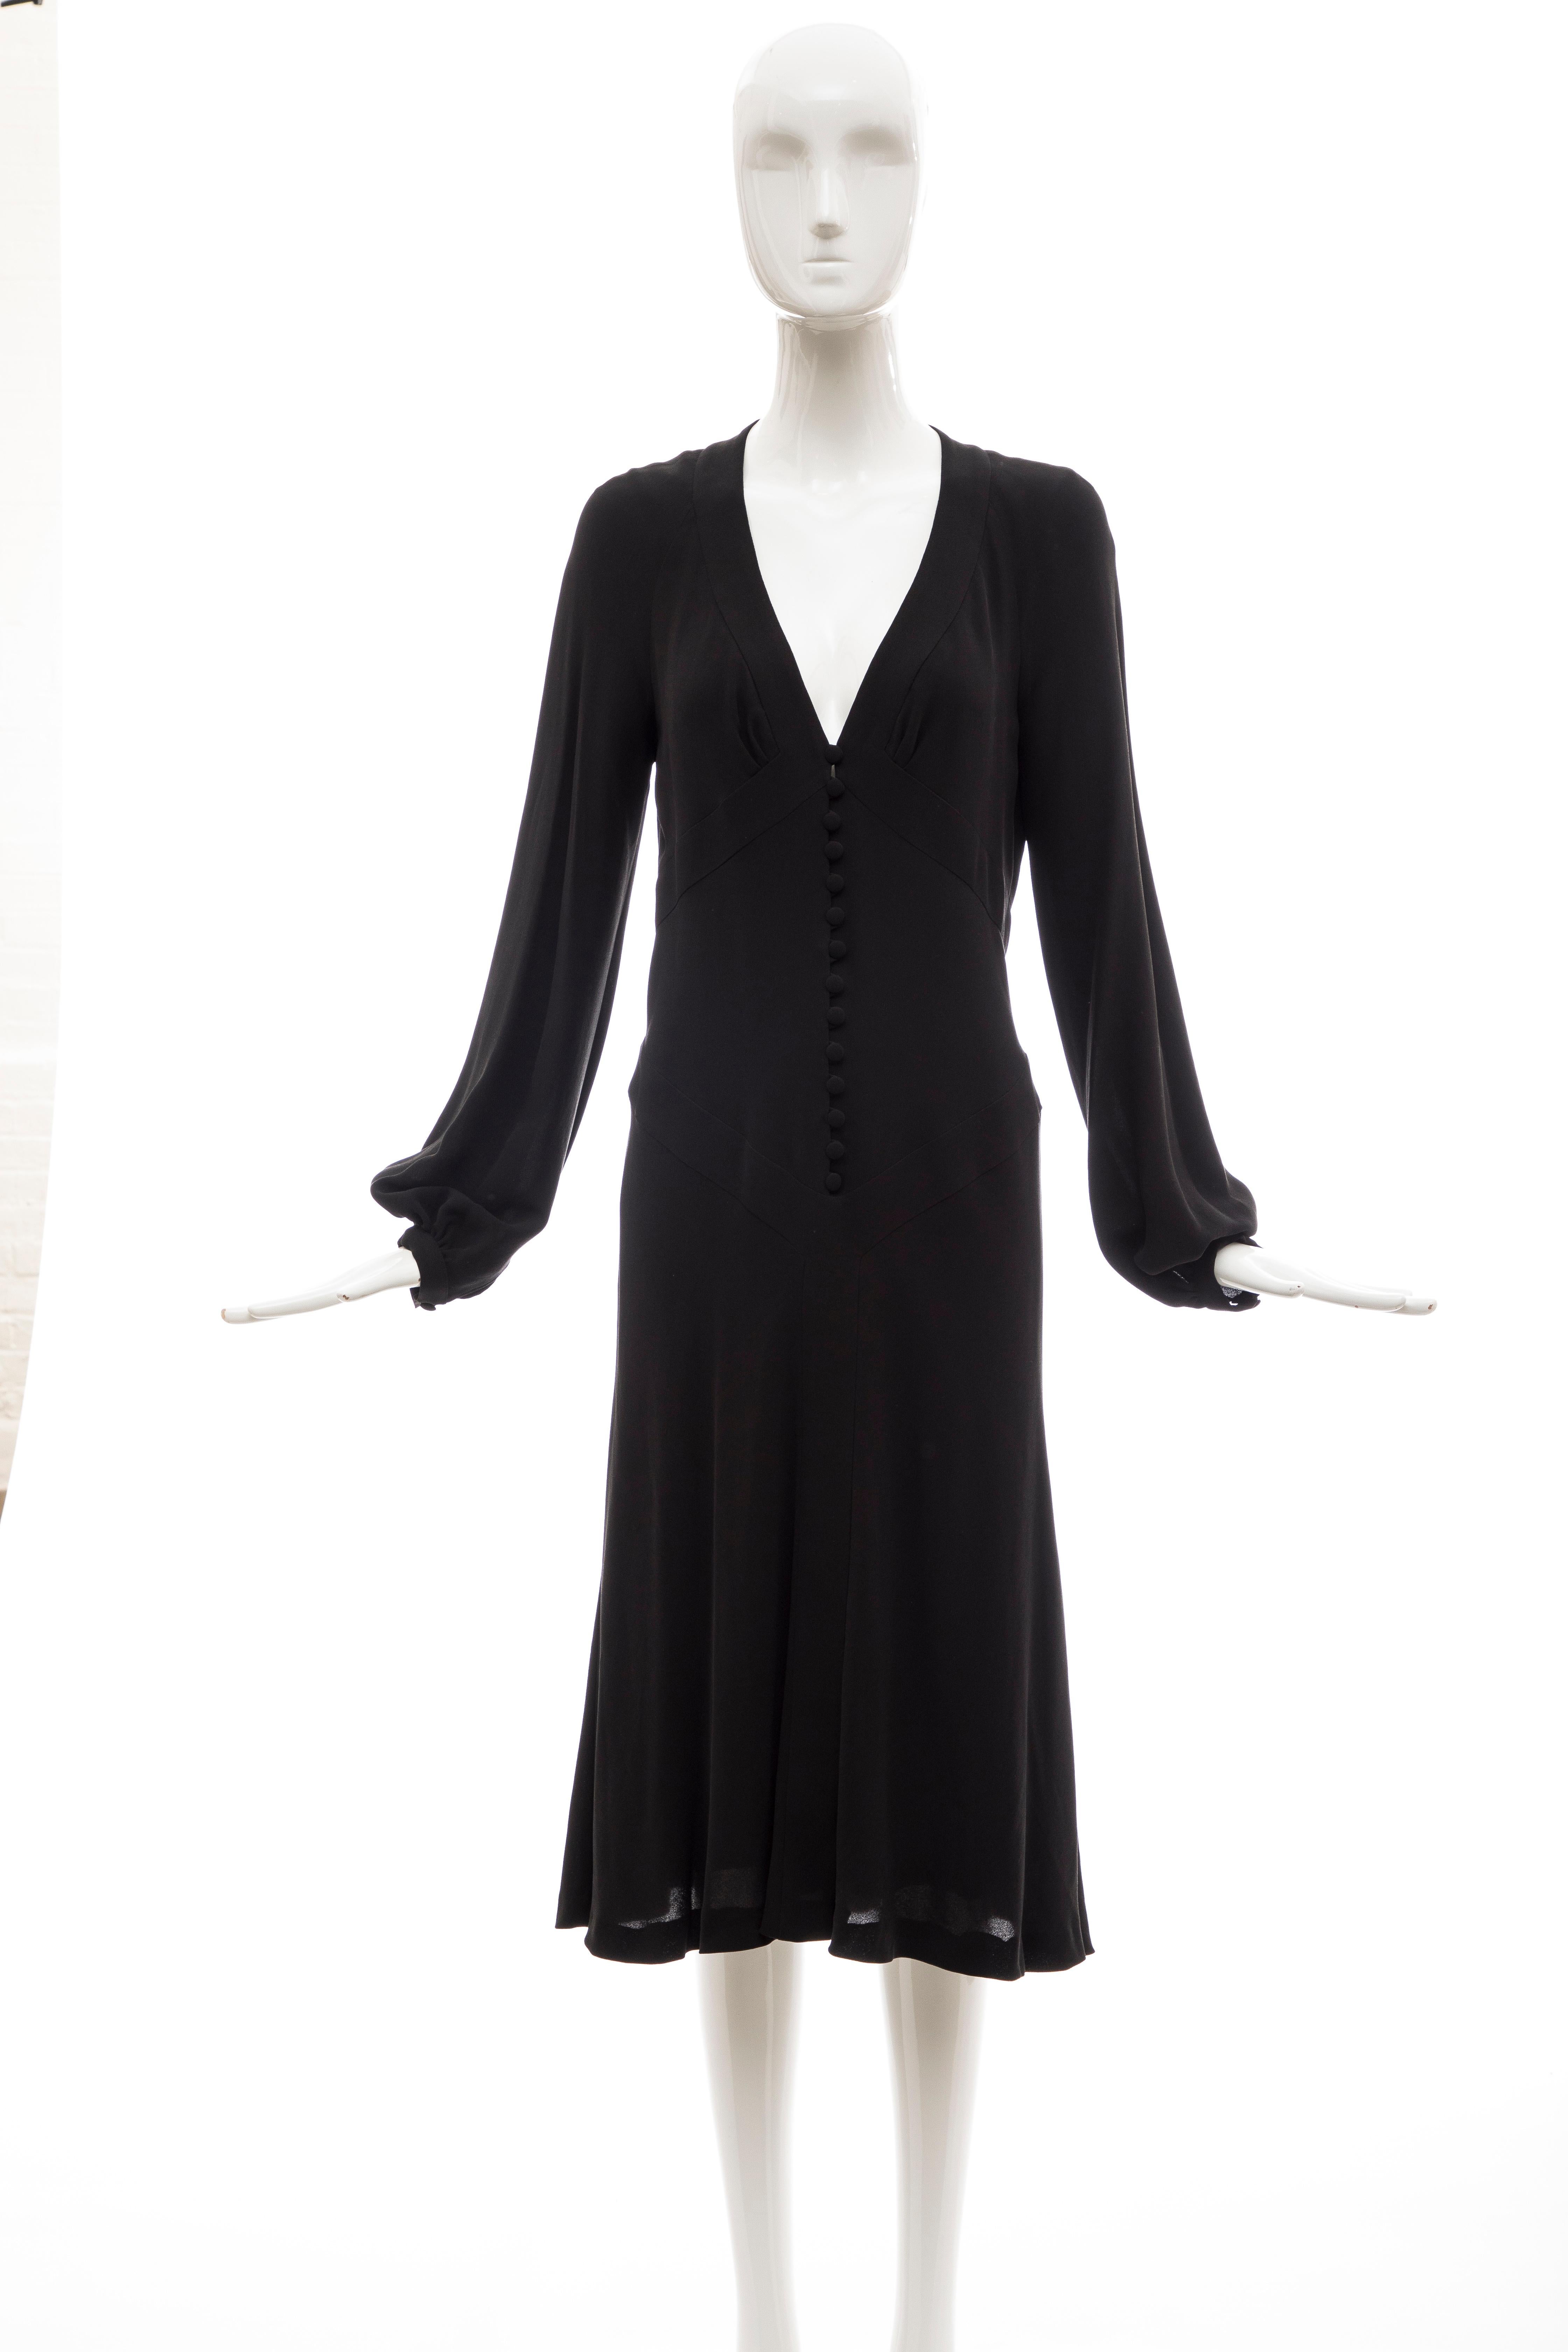 Alexander McQueen, Spring 2007 black silk long sleeve covered button front dress, fully lined in silk.

Retail: 2380

IT. 42
US. 6

Bust: 32, Waist 30, Hip: 35, Length: 43.5, 